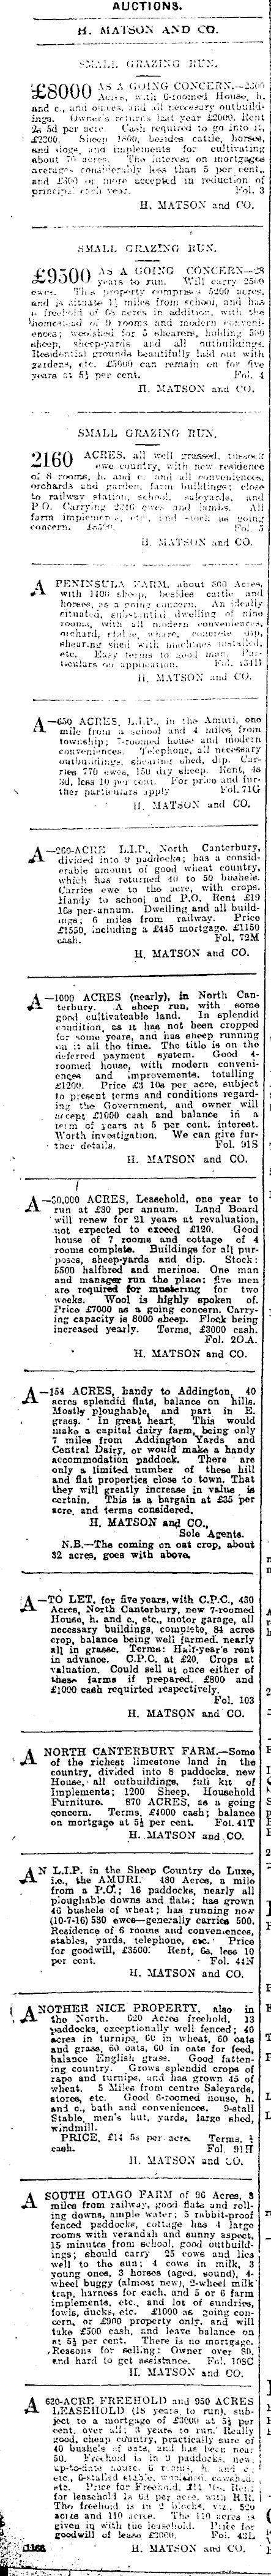 Papers Past Newspapers Press 22 December 1916 Page 12 Advertisements Column 1